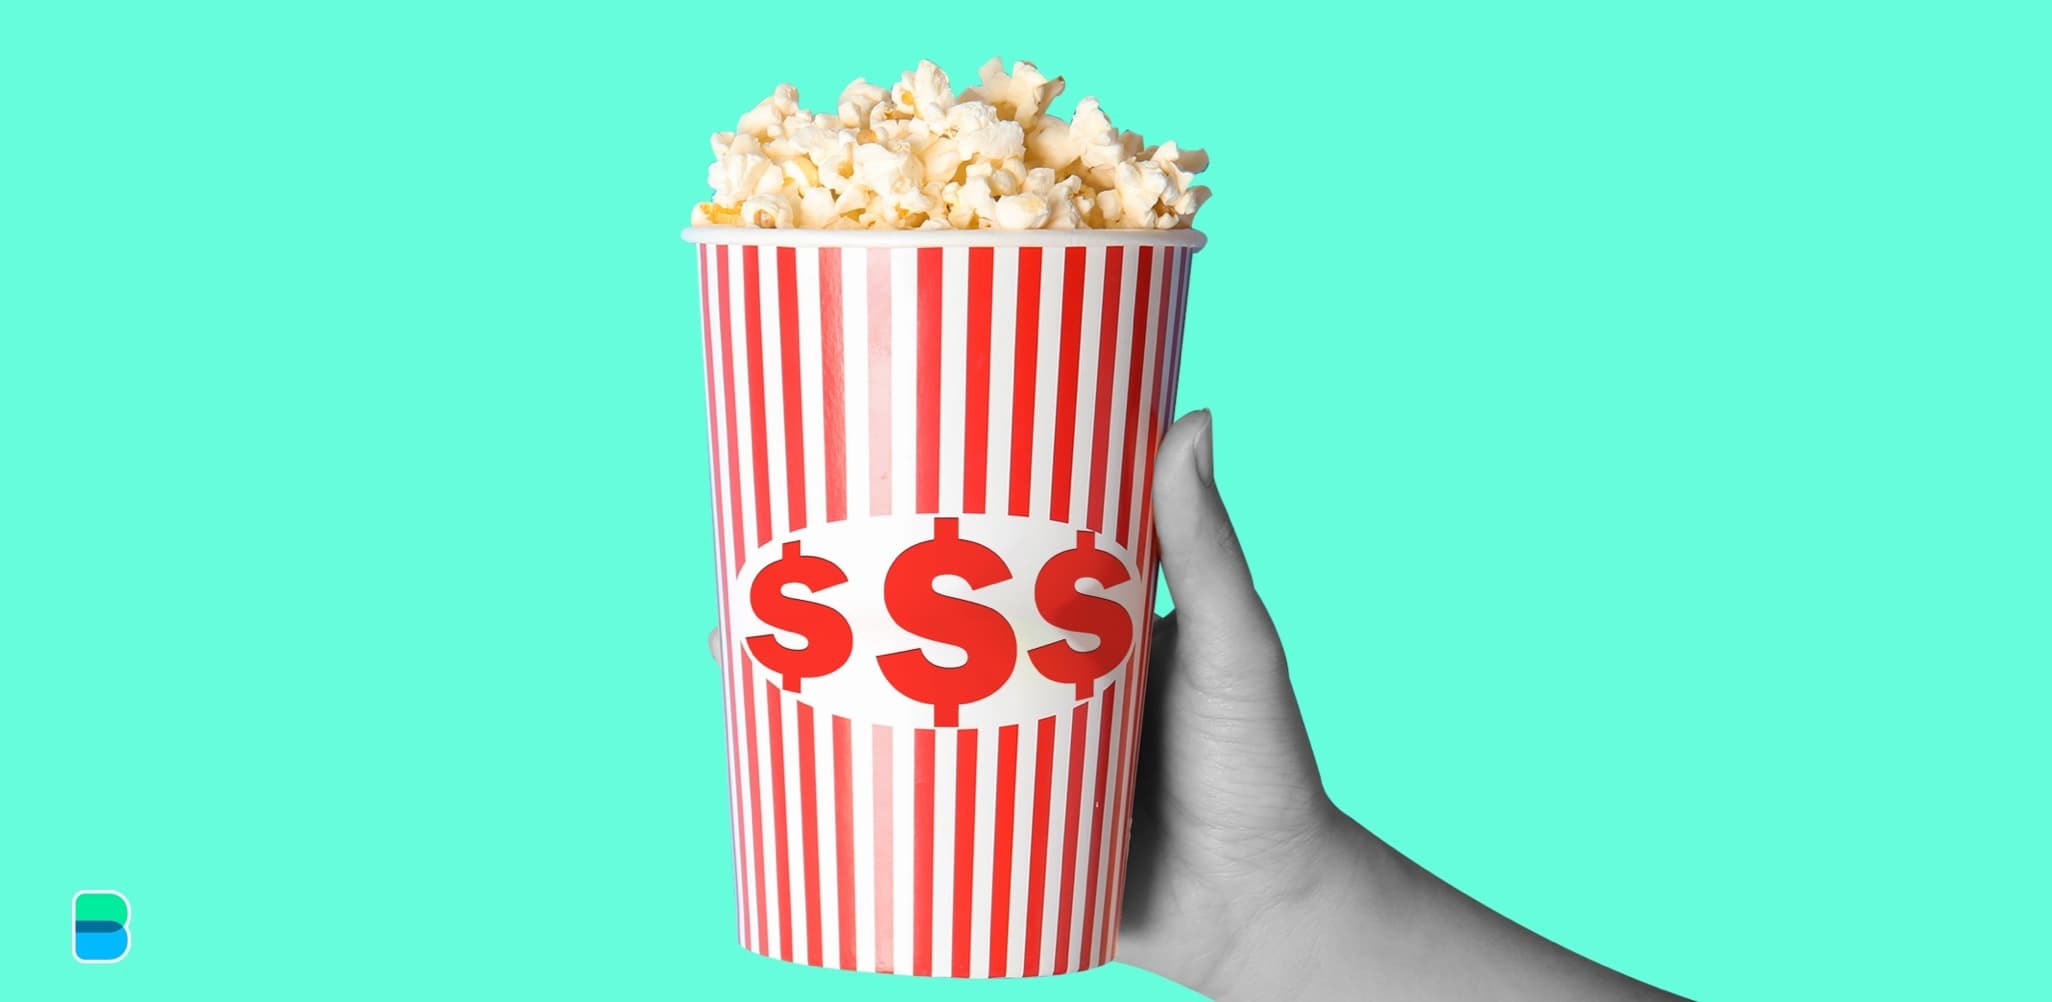 Grab some popcorn and let&rsquo;s talk about F&amp;B